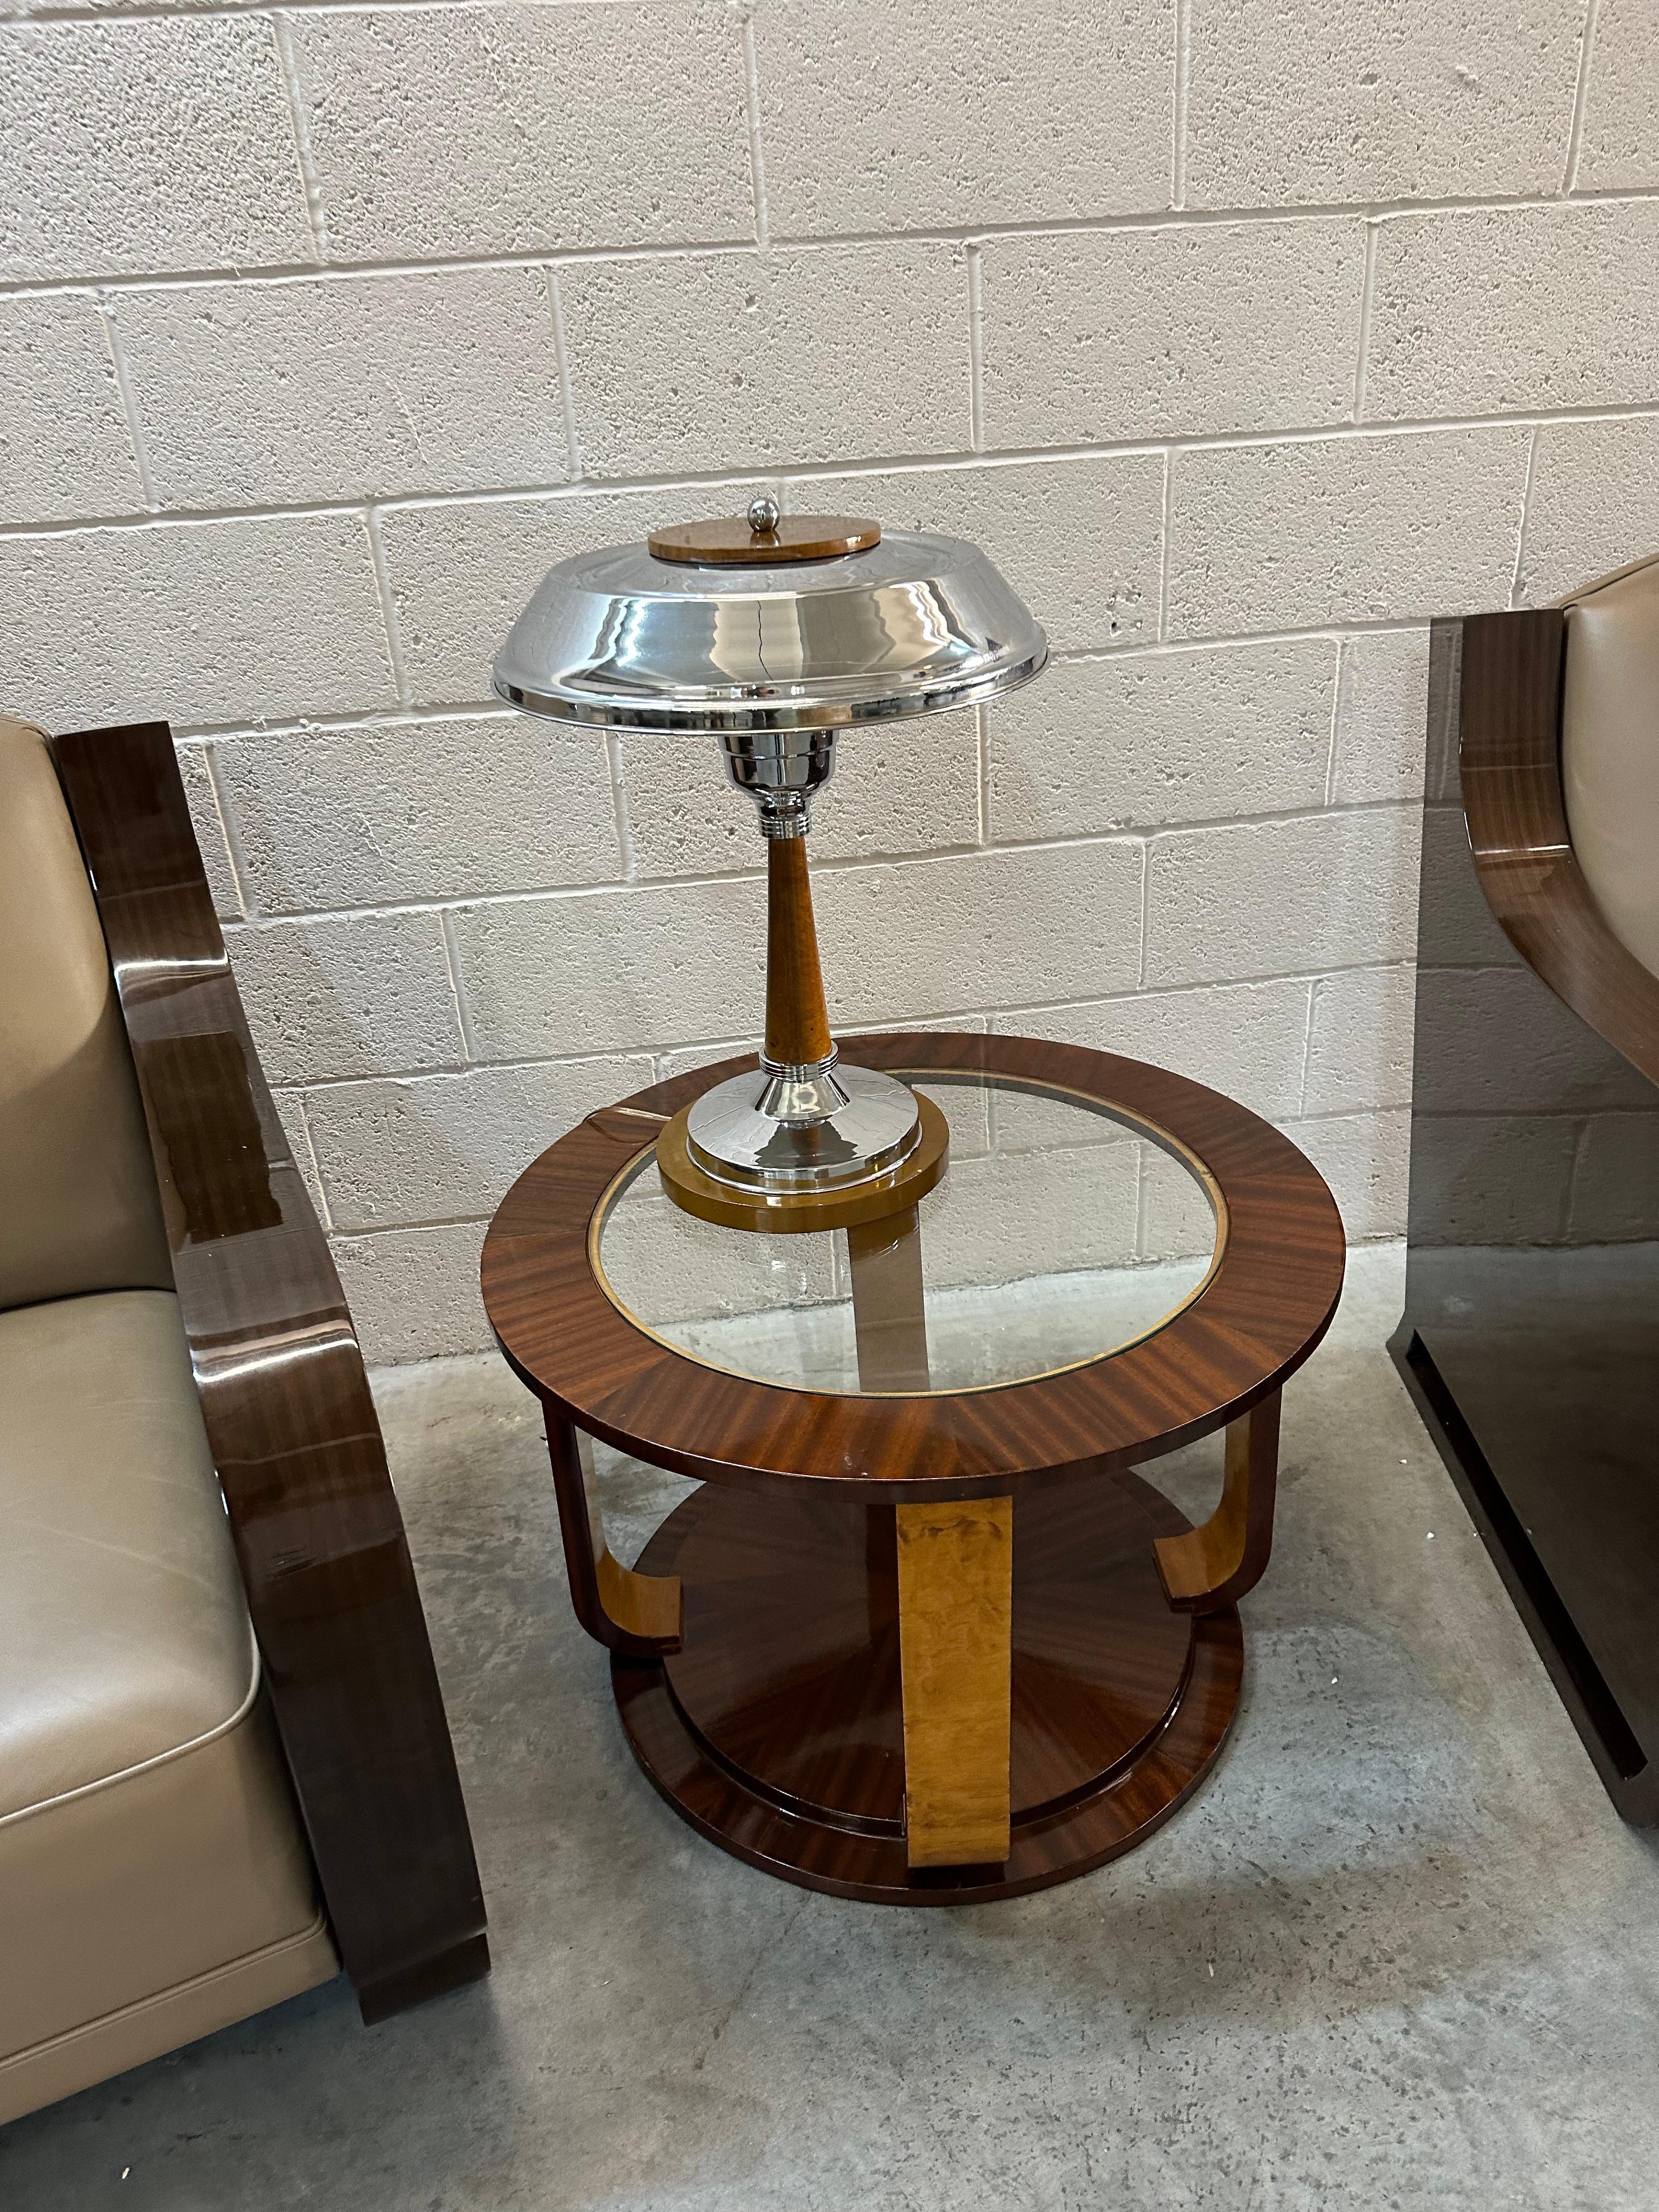 Pair of Art Deco Table Lamps in wood and chrome, 1920, France For Sale 5